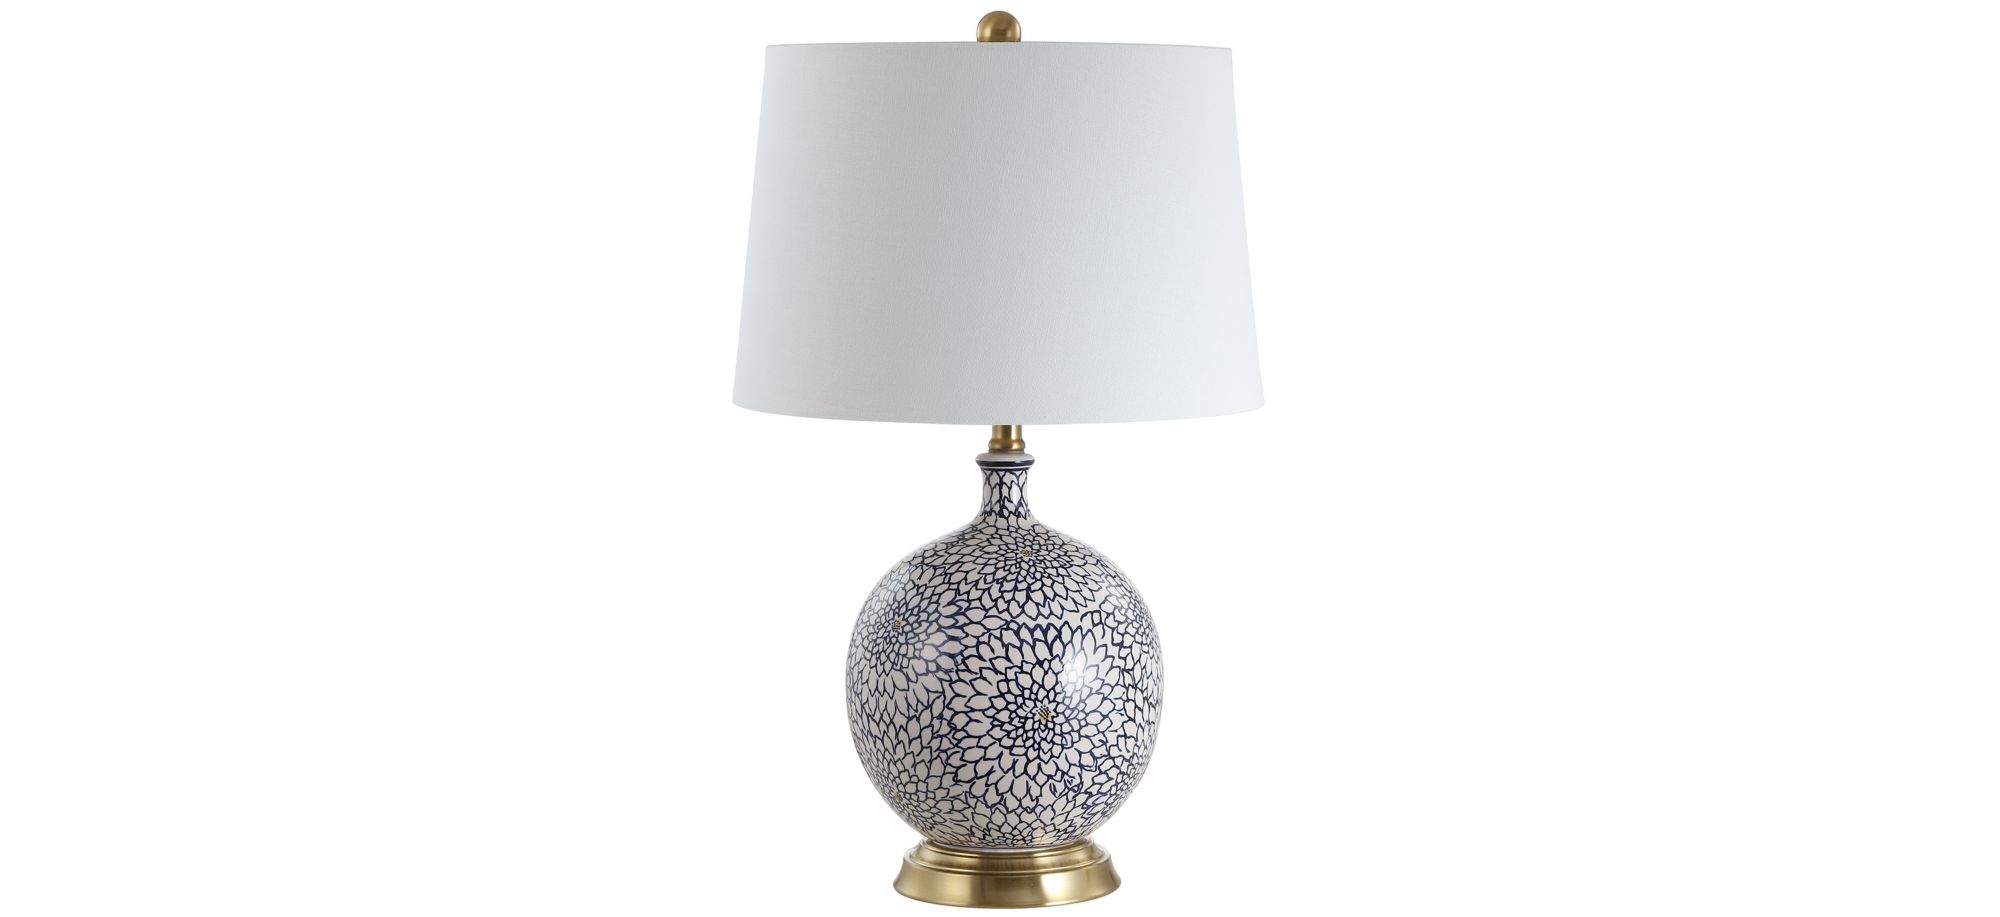 Magdalene Table Lamp in Blue by Safavieh